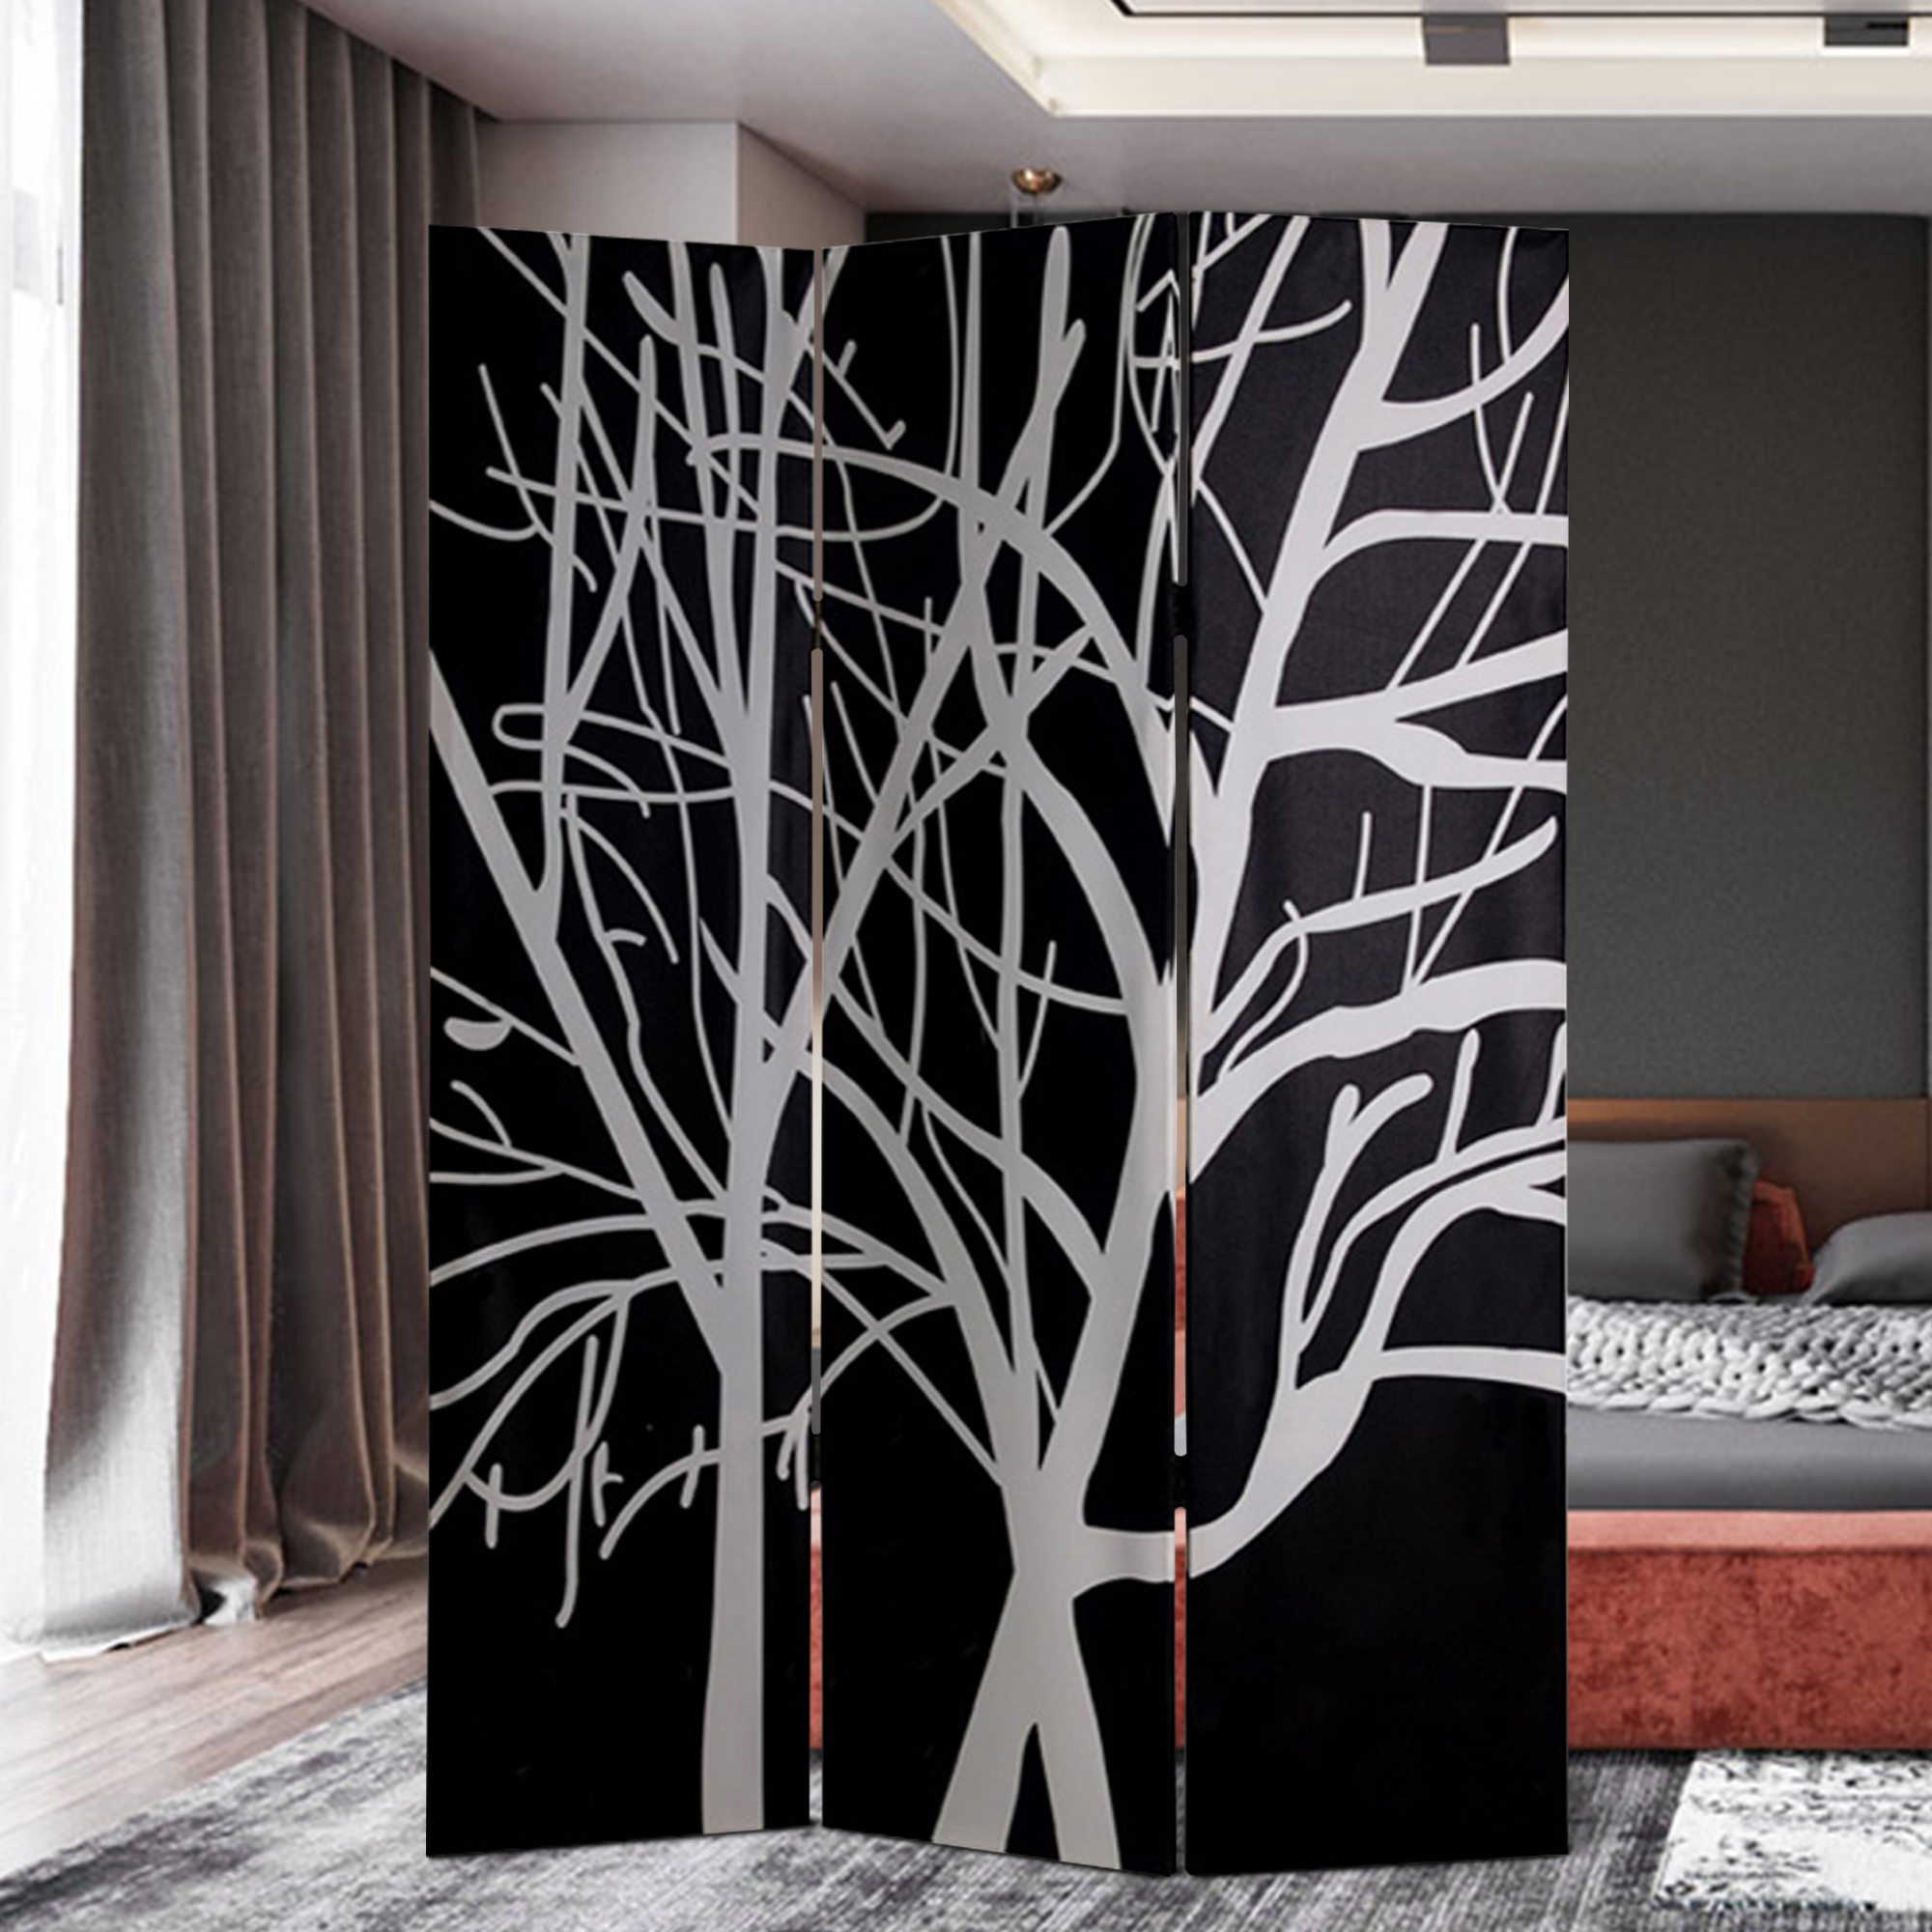 3 Panel Canvas Room Divider With Branch Pattern, Black And White- Saltoro Sherpi